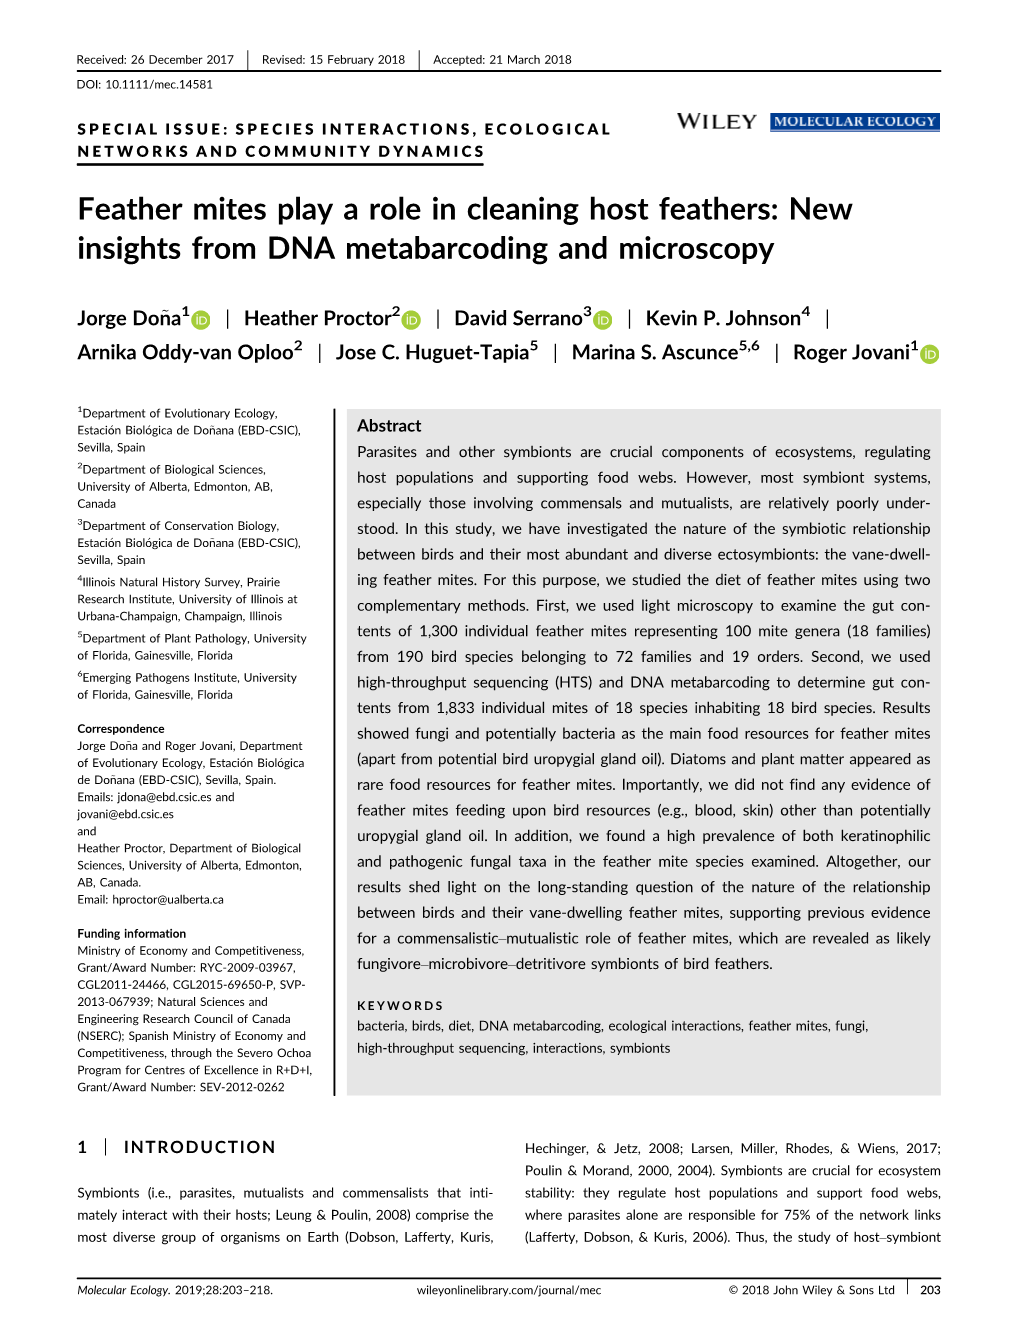 Feather Mites Play a Role in Cleaning Host Feathers: New Insights from DNA Metabarcoding and Microscopy